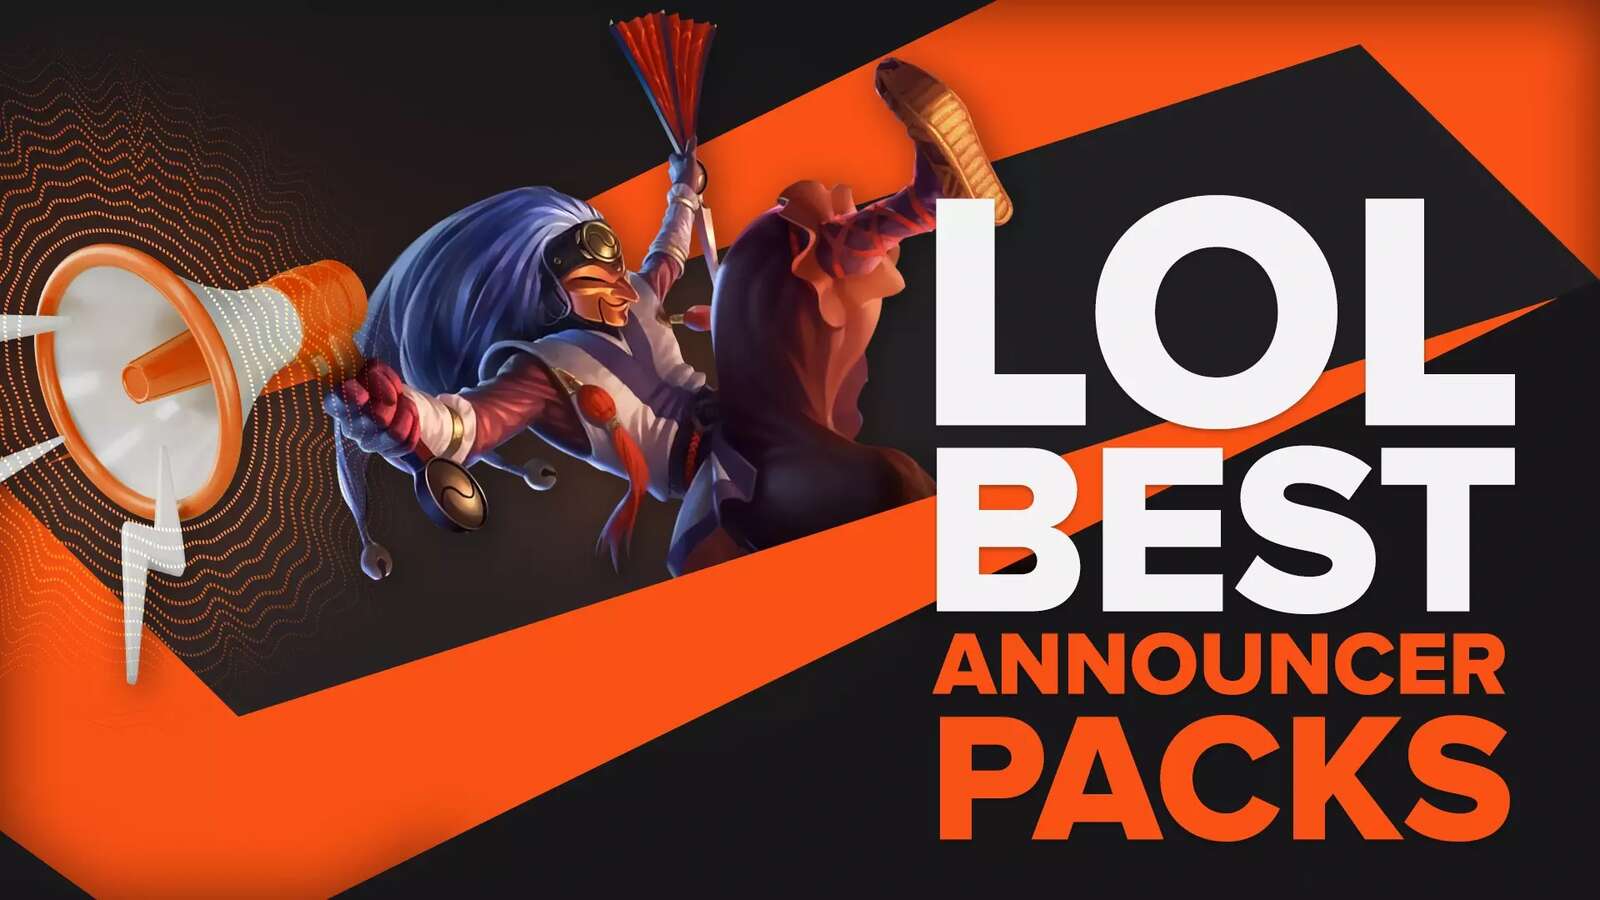 5 Best Announcer Packs to Install in LoL